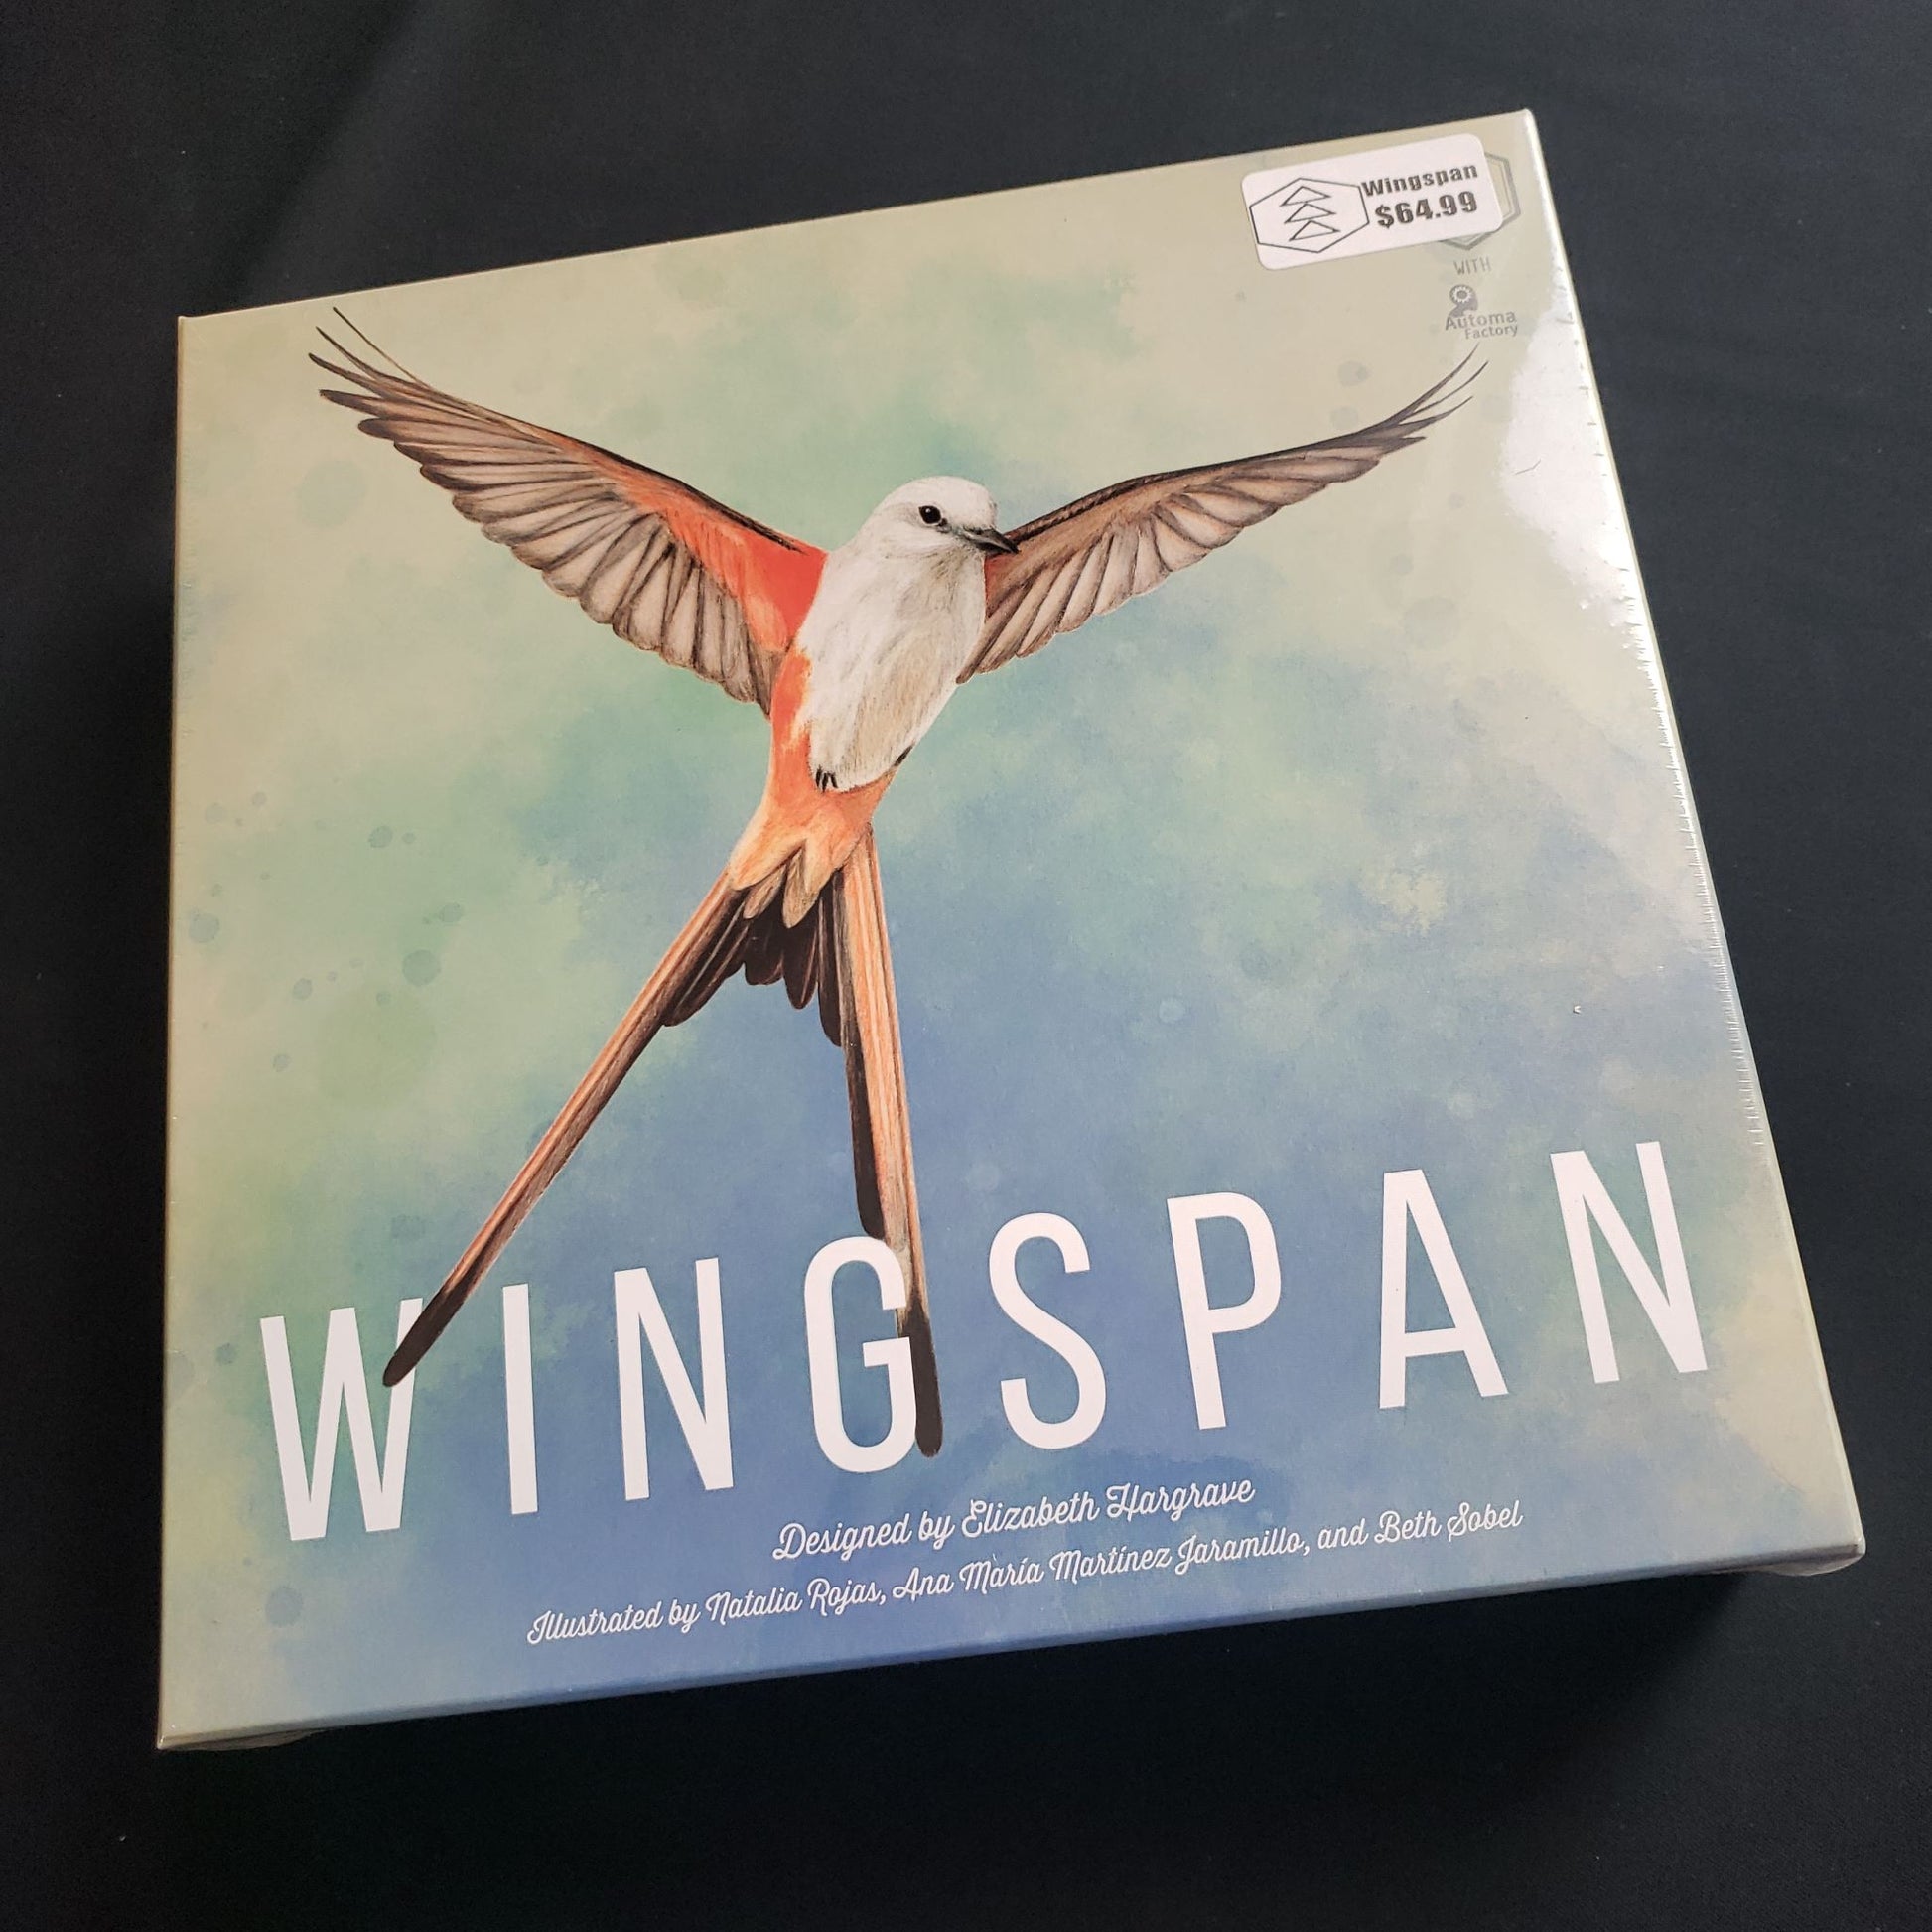 Wingspan board game - front cover of box